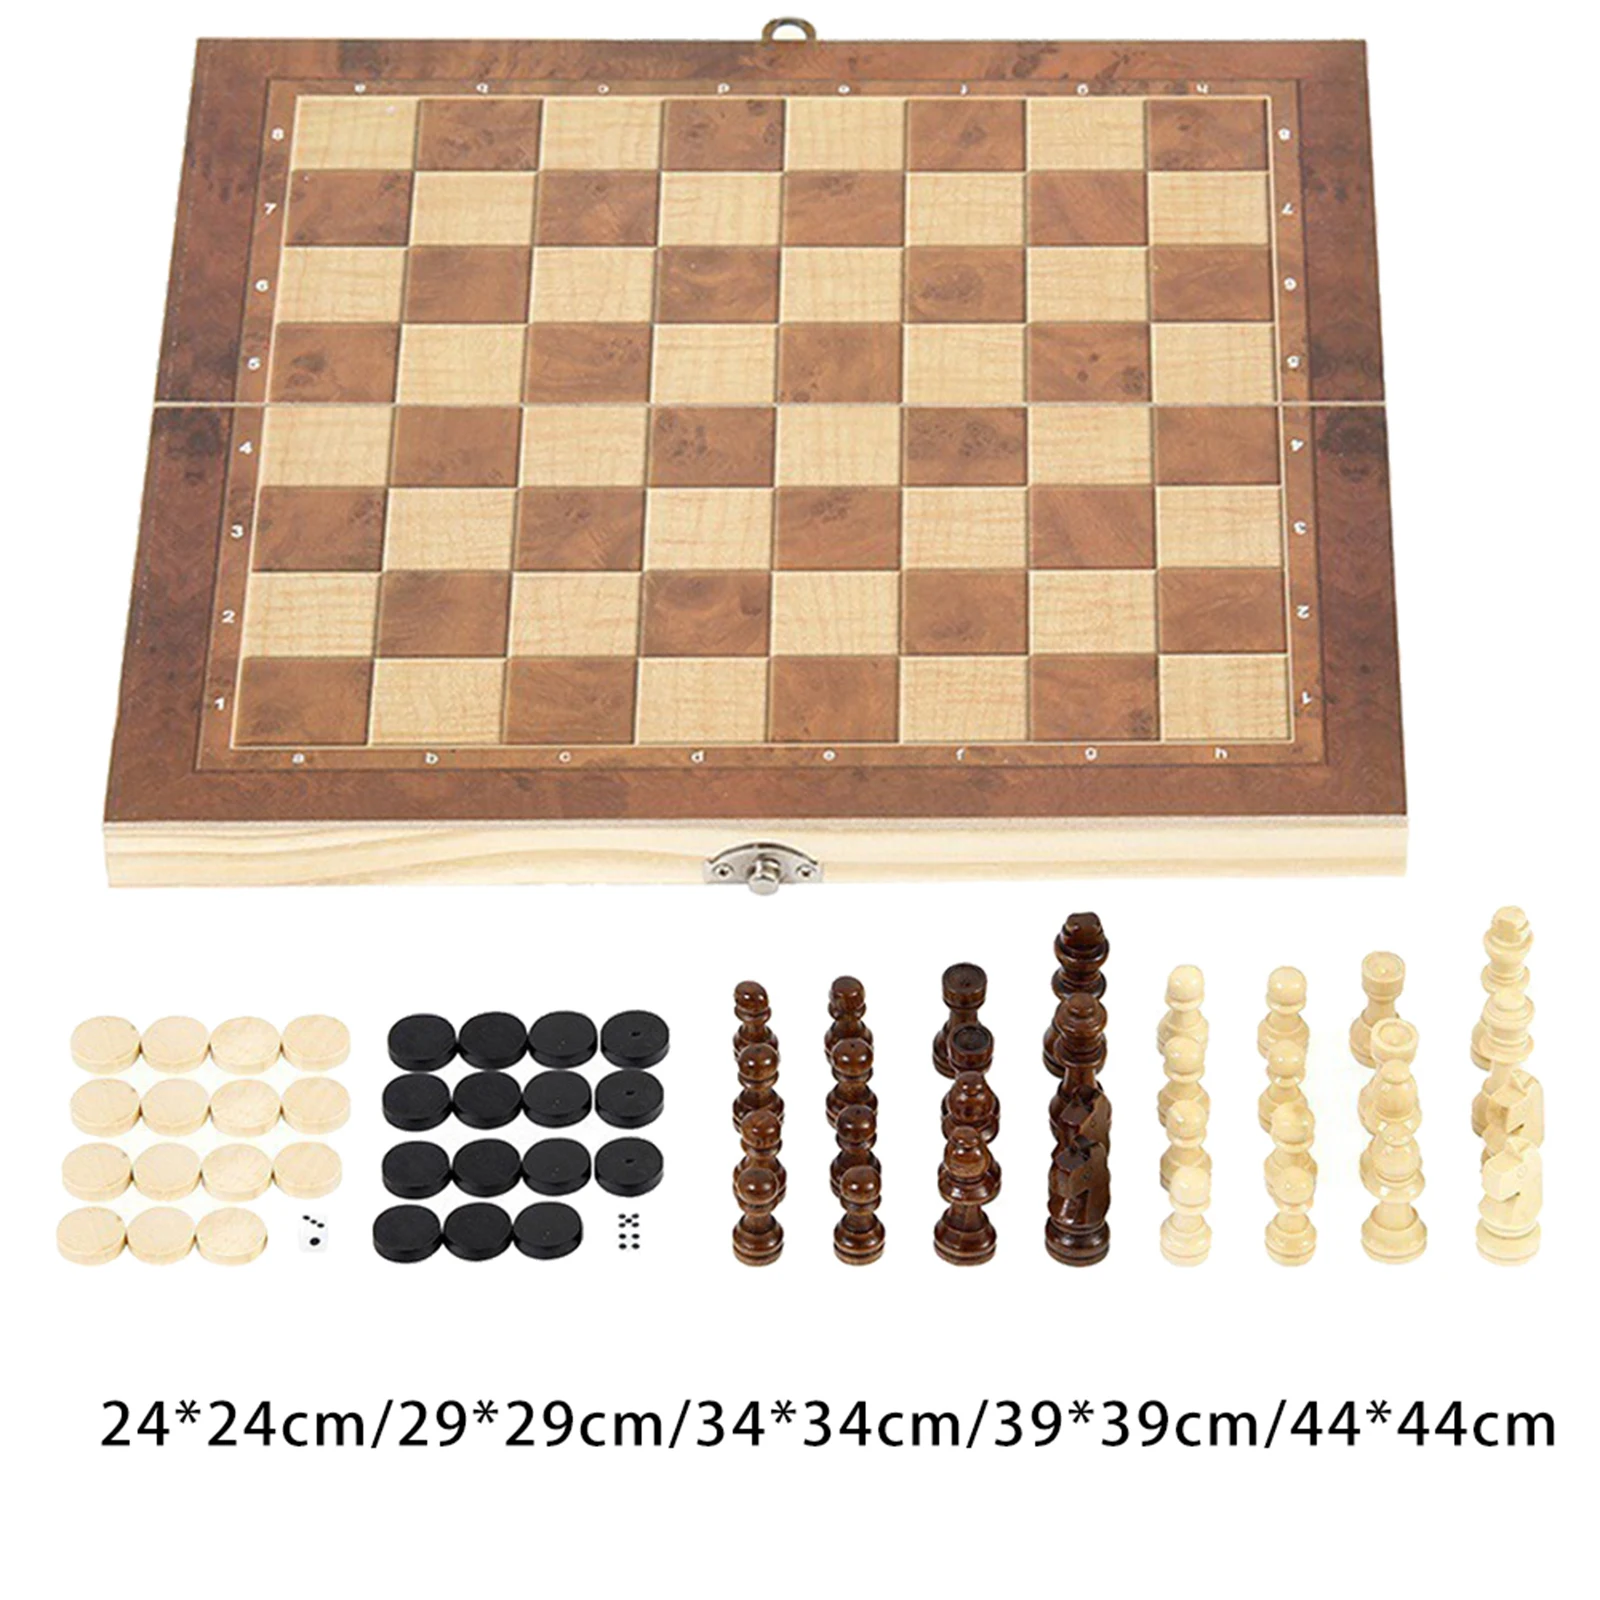 3 in1 WOODEN CHESS SET Board Game Checkers Backgammon Draughts Christmas Gift 